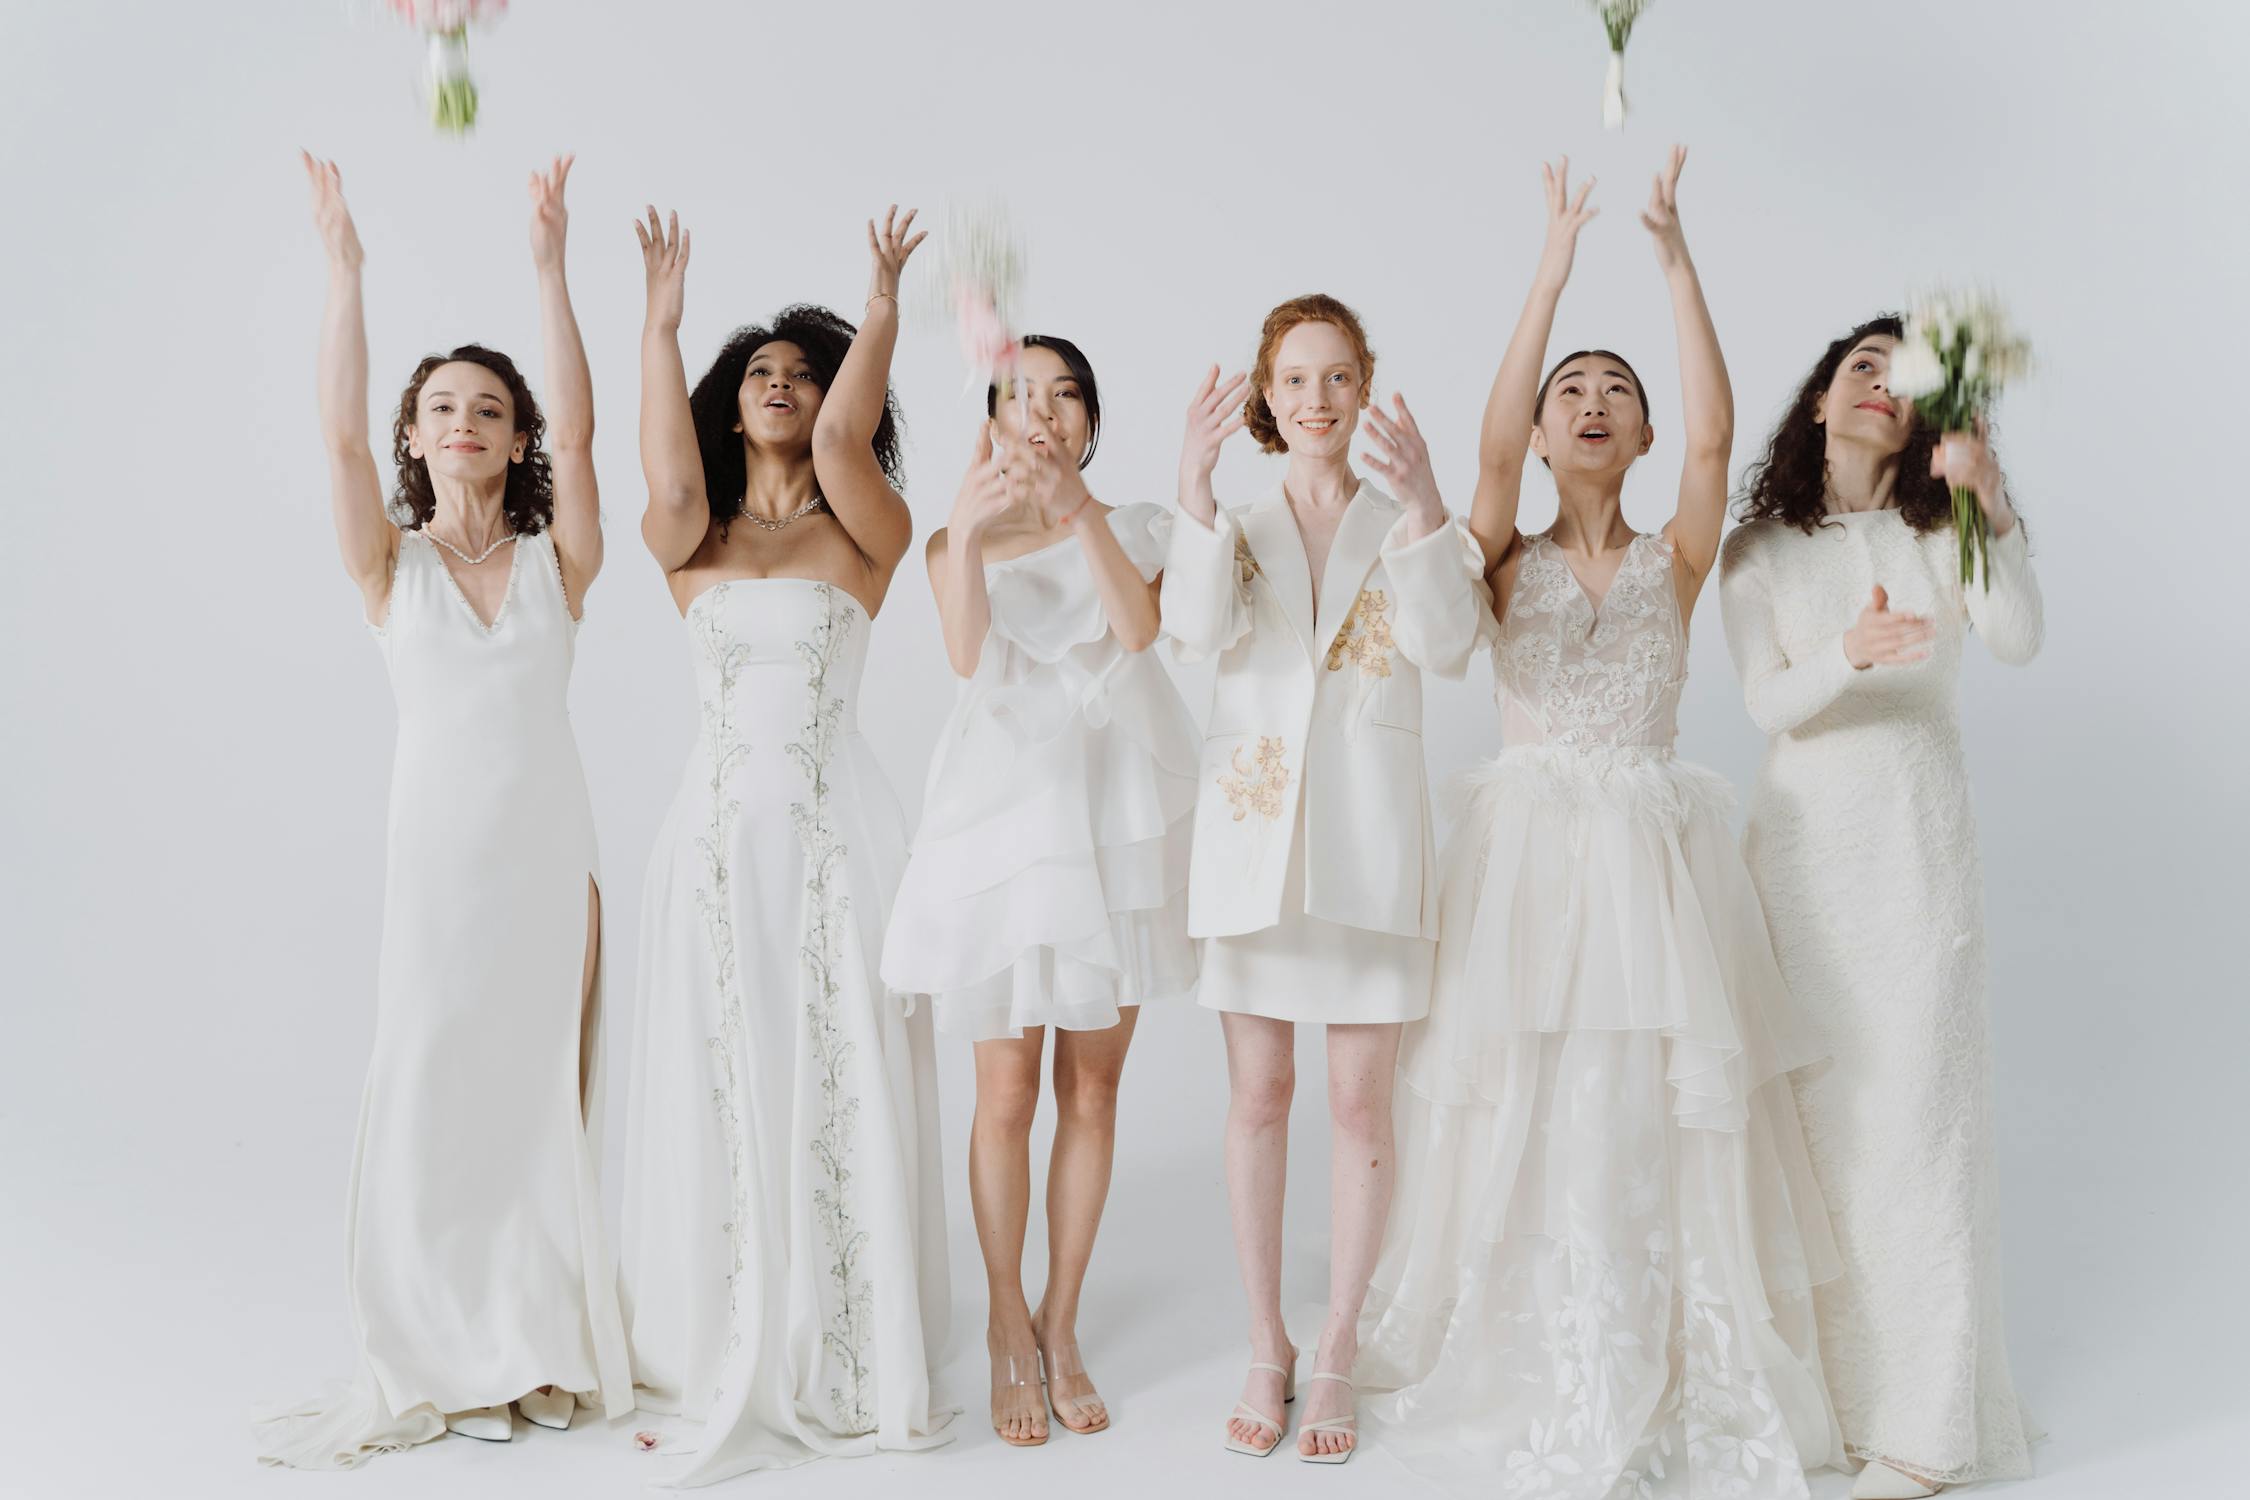 Women in White Dresses Throwing Bouquet of Flowers · Free Stock Photo